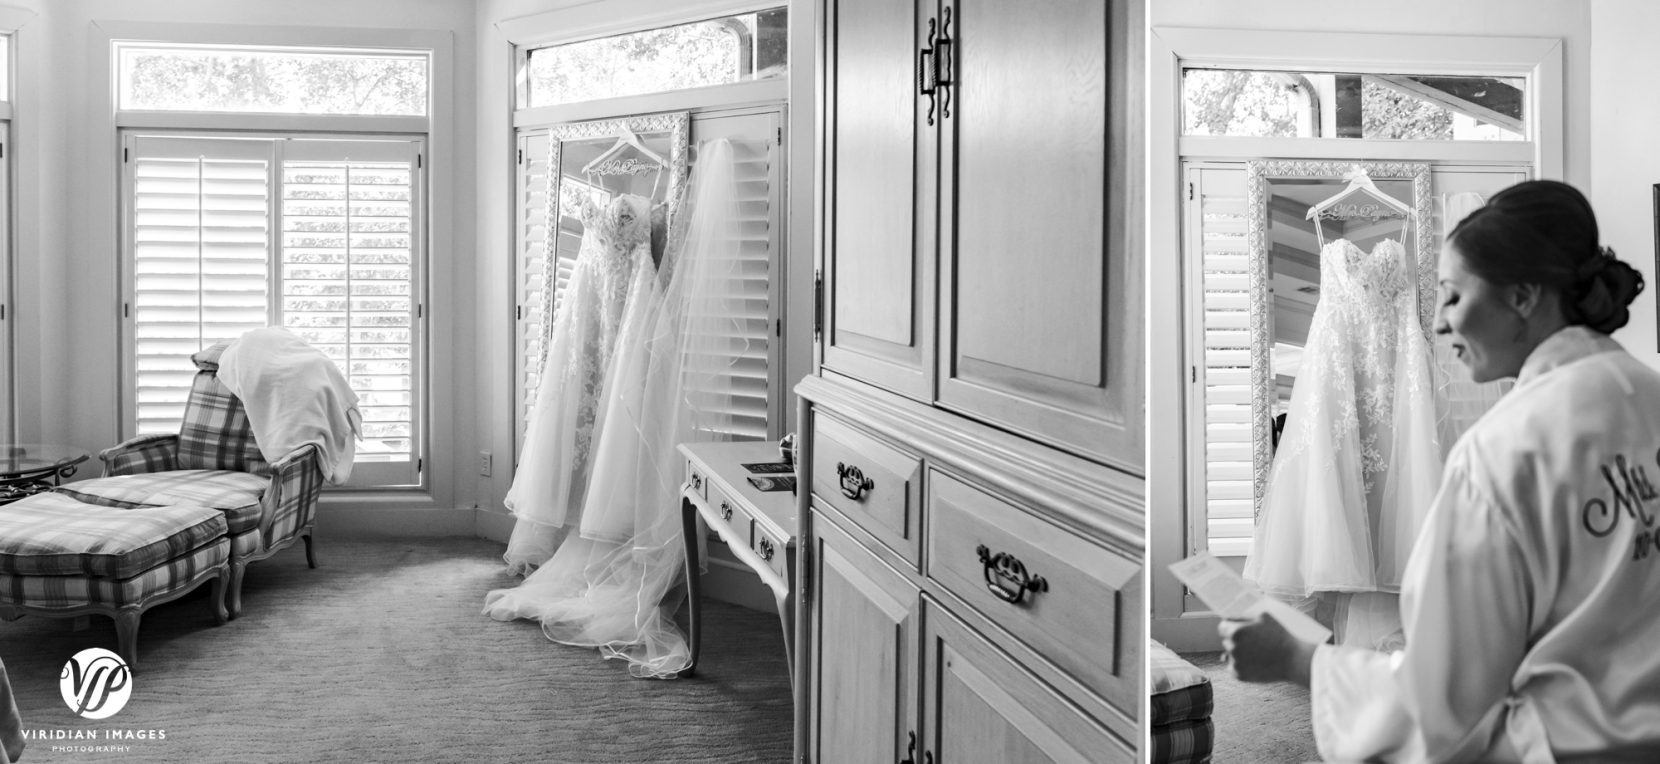 wide shot of wedding dress from viewpoint of entering room